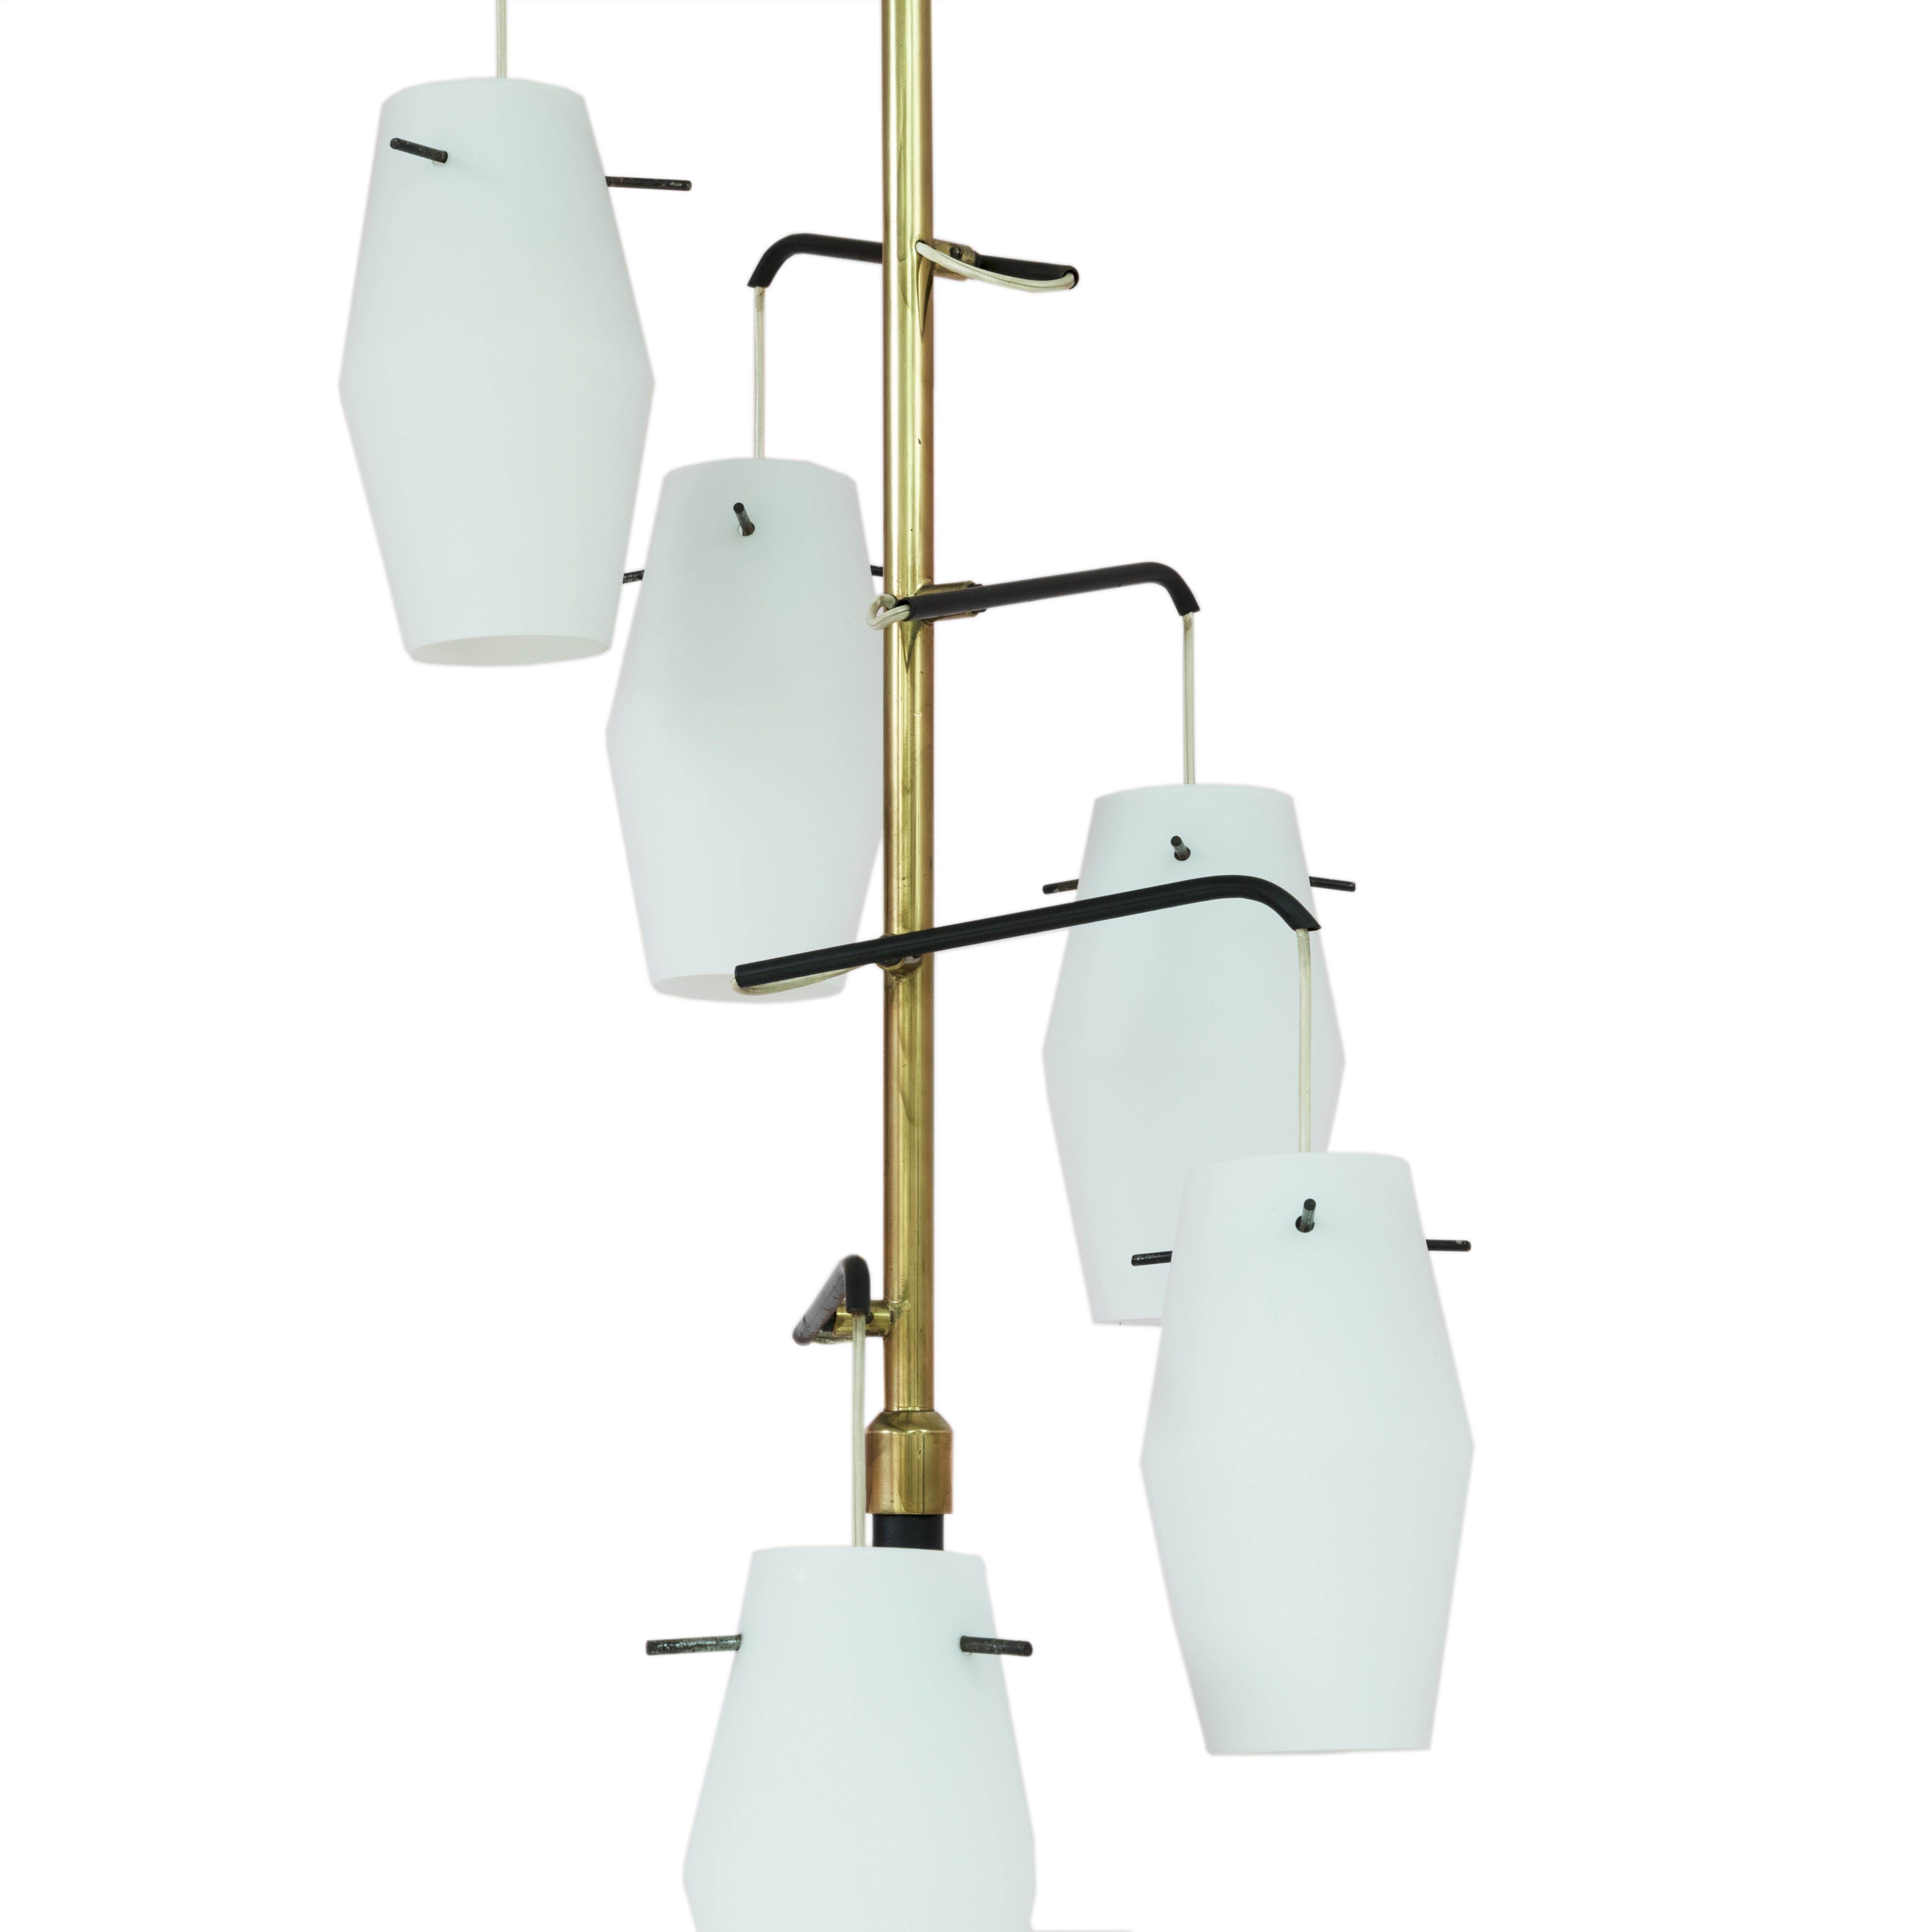 Italian floor lamp manufactured in the mid-1950s by Chiarini, brass structure and white opaline glass shades.